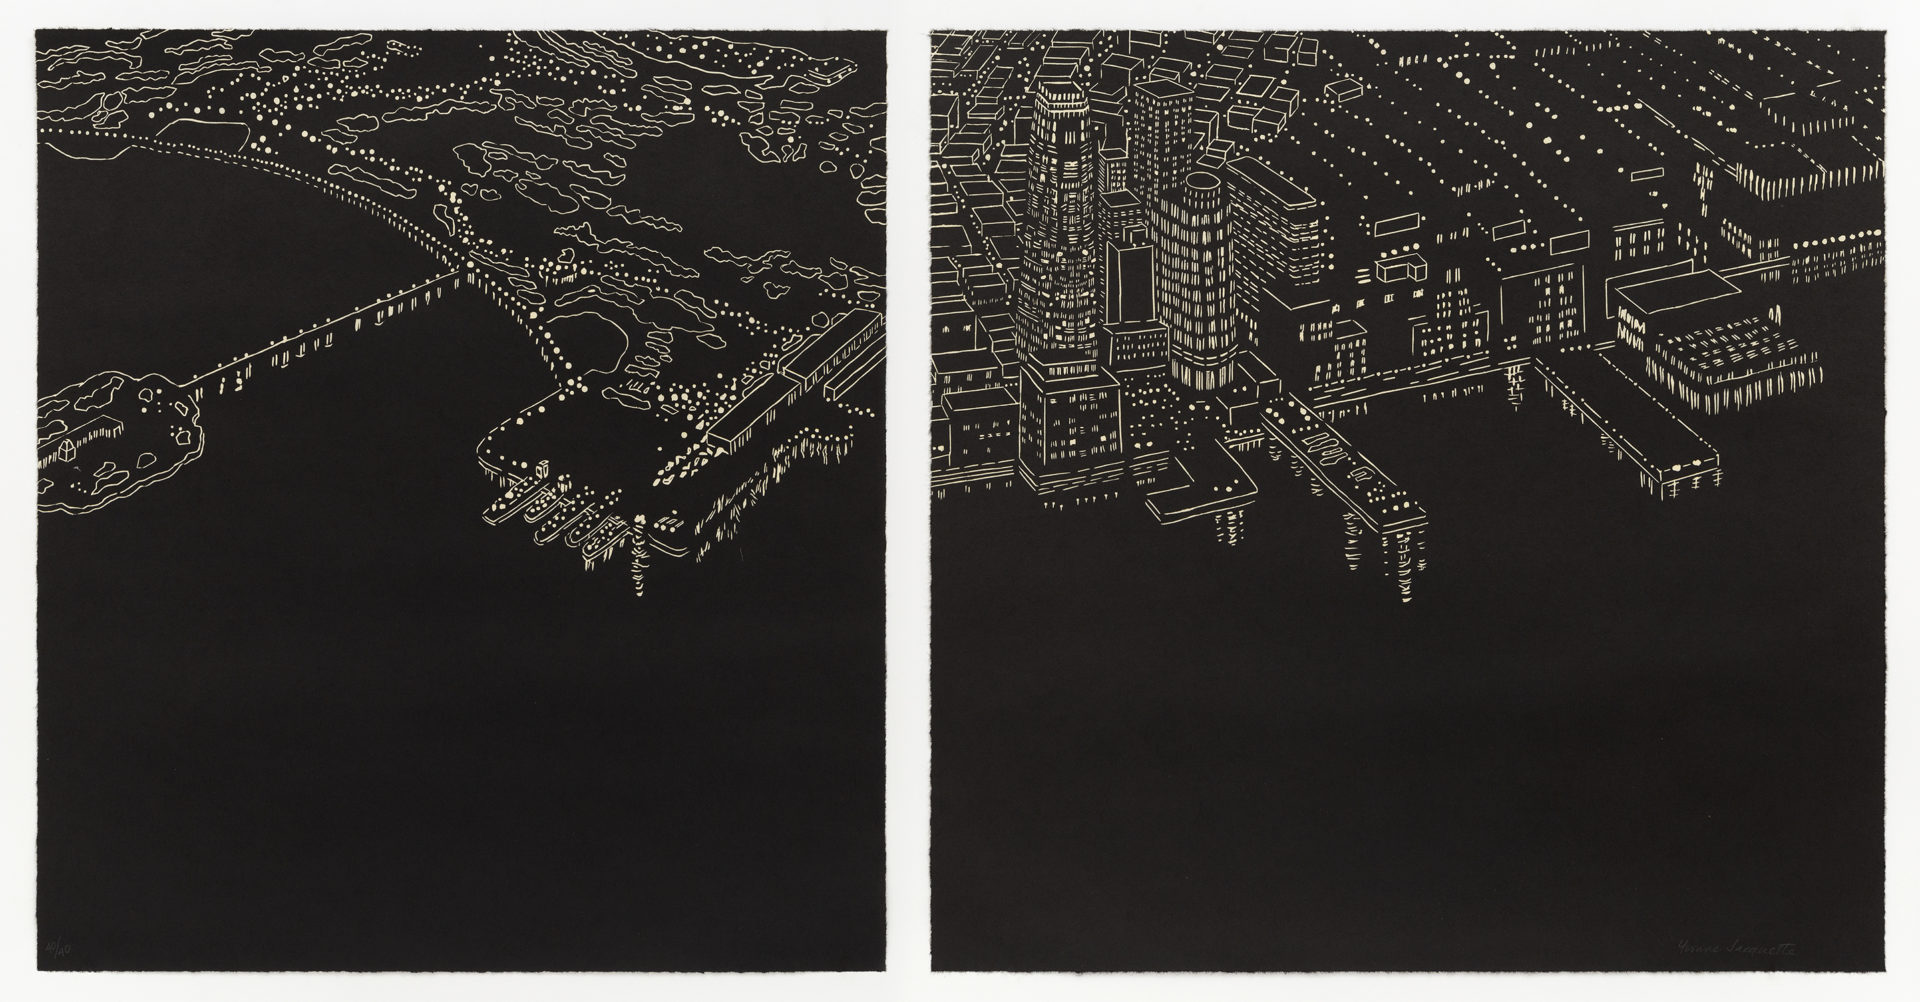 Hudson River Diptych, 2007, Woodcut, 21 x 40 inches (53.3 x 101.6 cm), Edition of 40